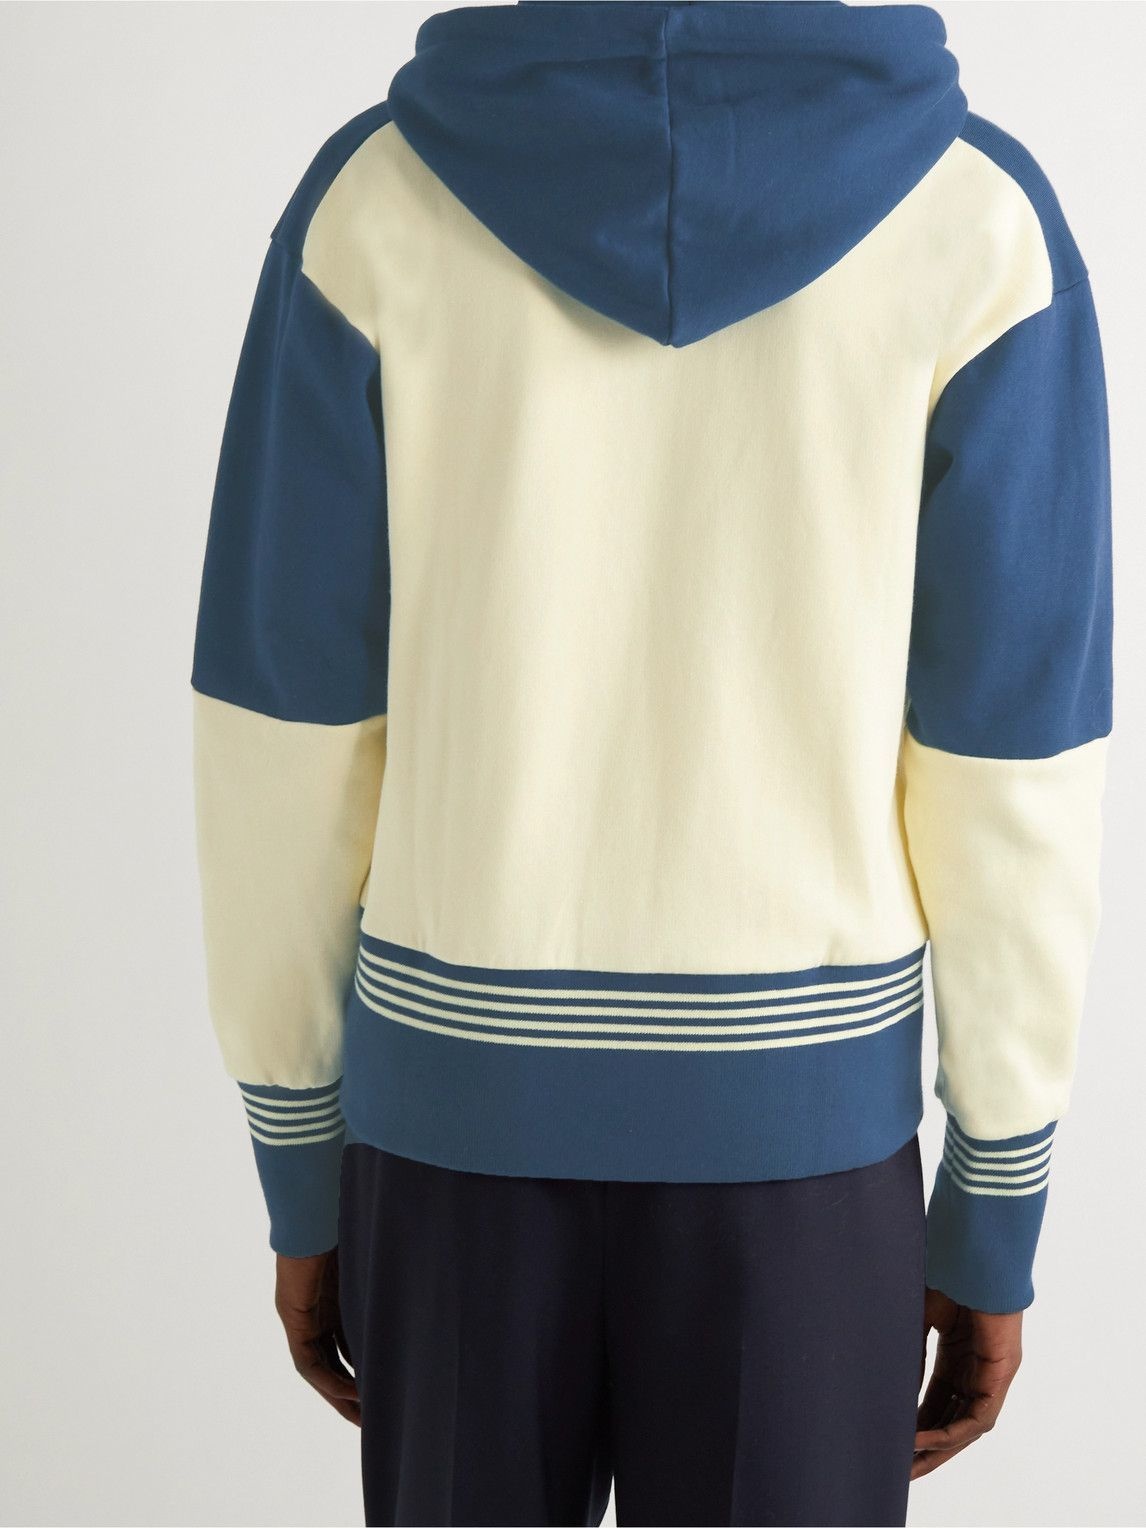 Wales Bonner - Stereo Colour-Block Cotton-Jersey Zip-Up Hoodie